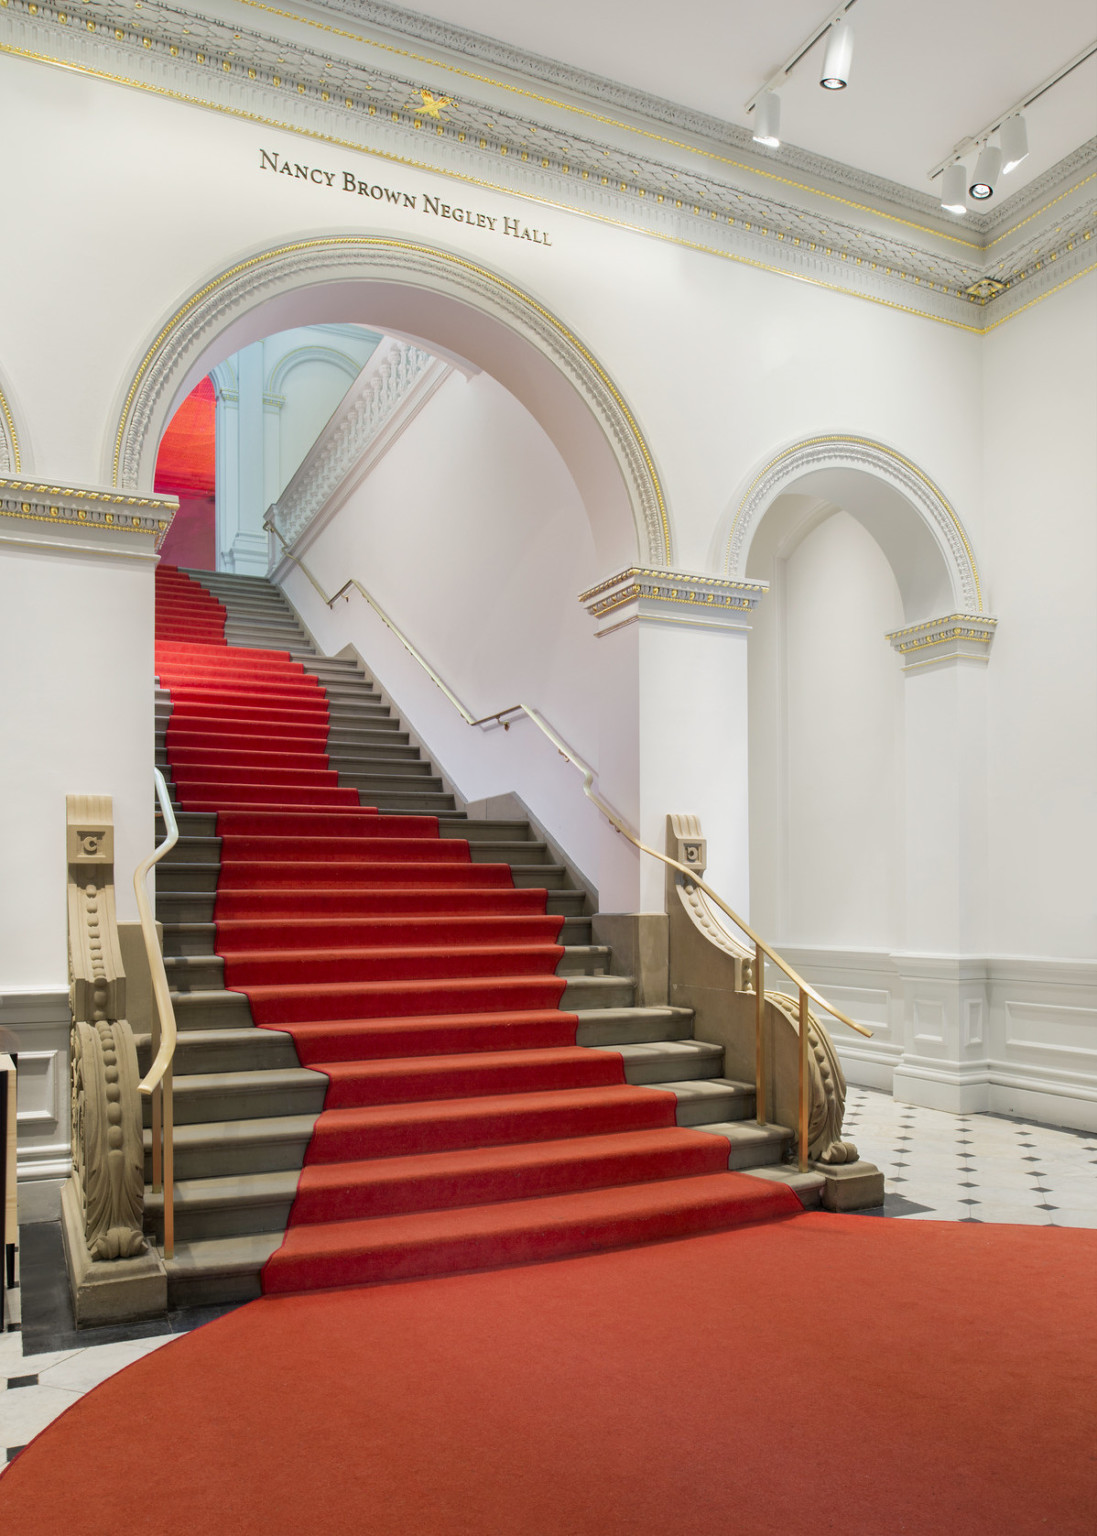 Grand staircase with curved red carpet that widens at base of stairs. Stairs pass through a white arch with gold molding